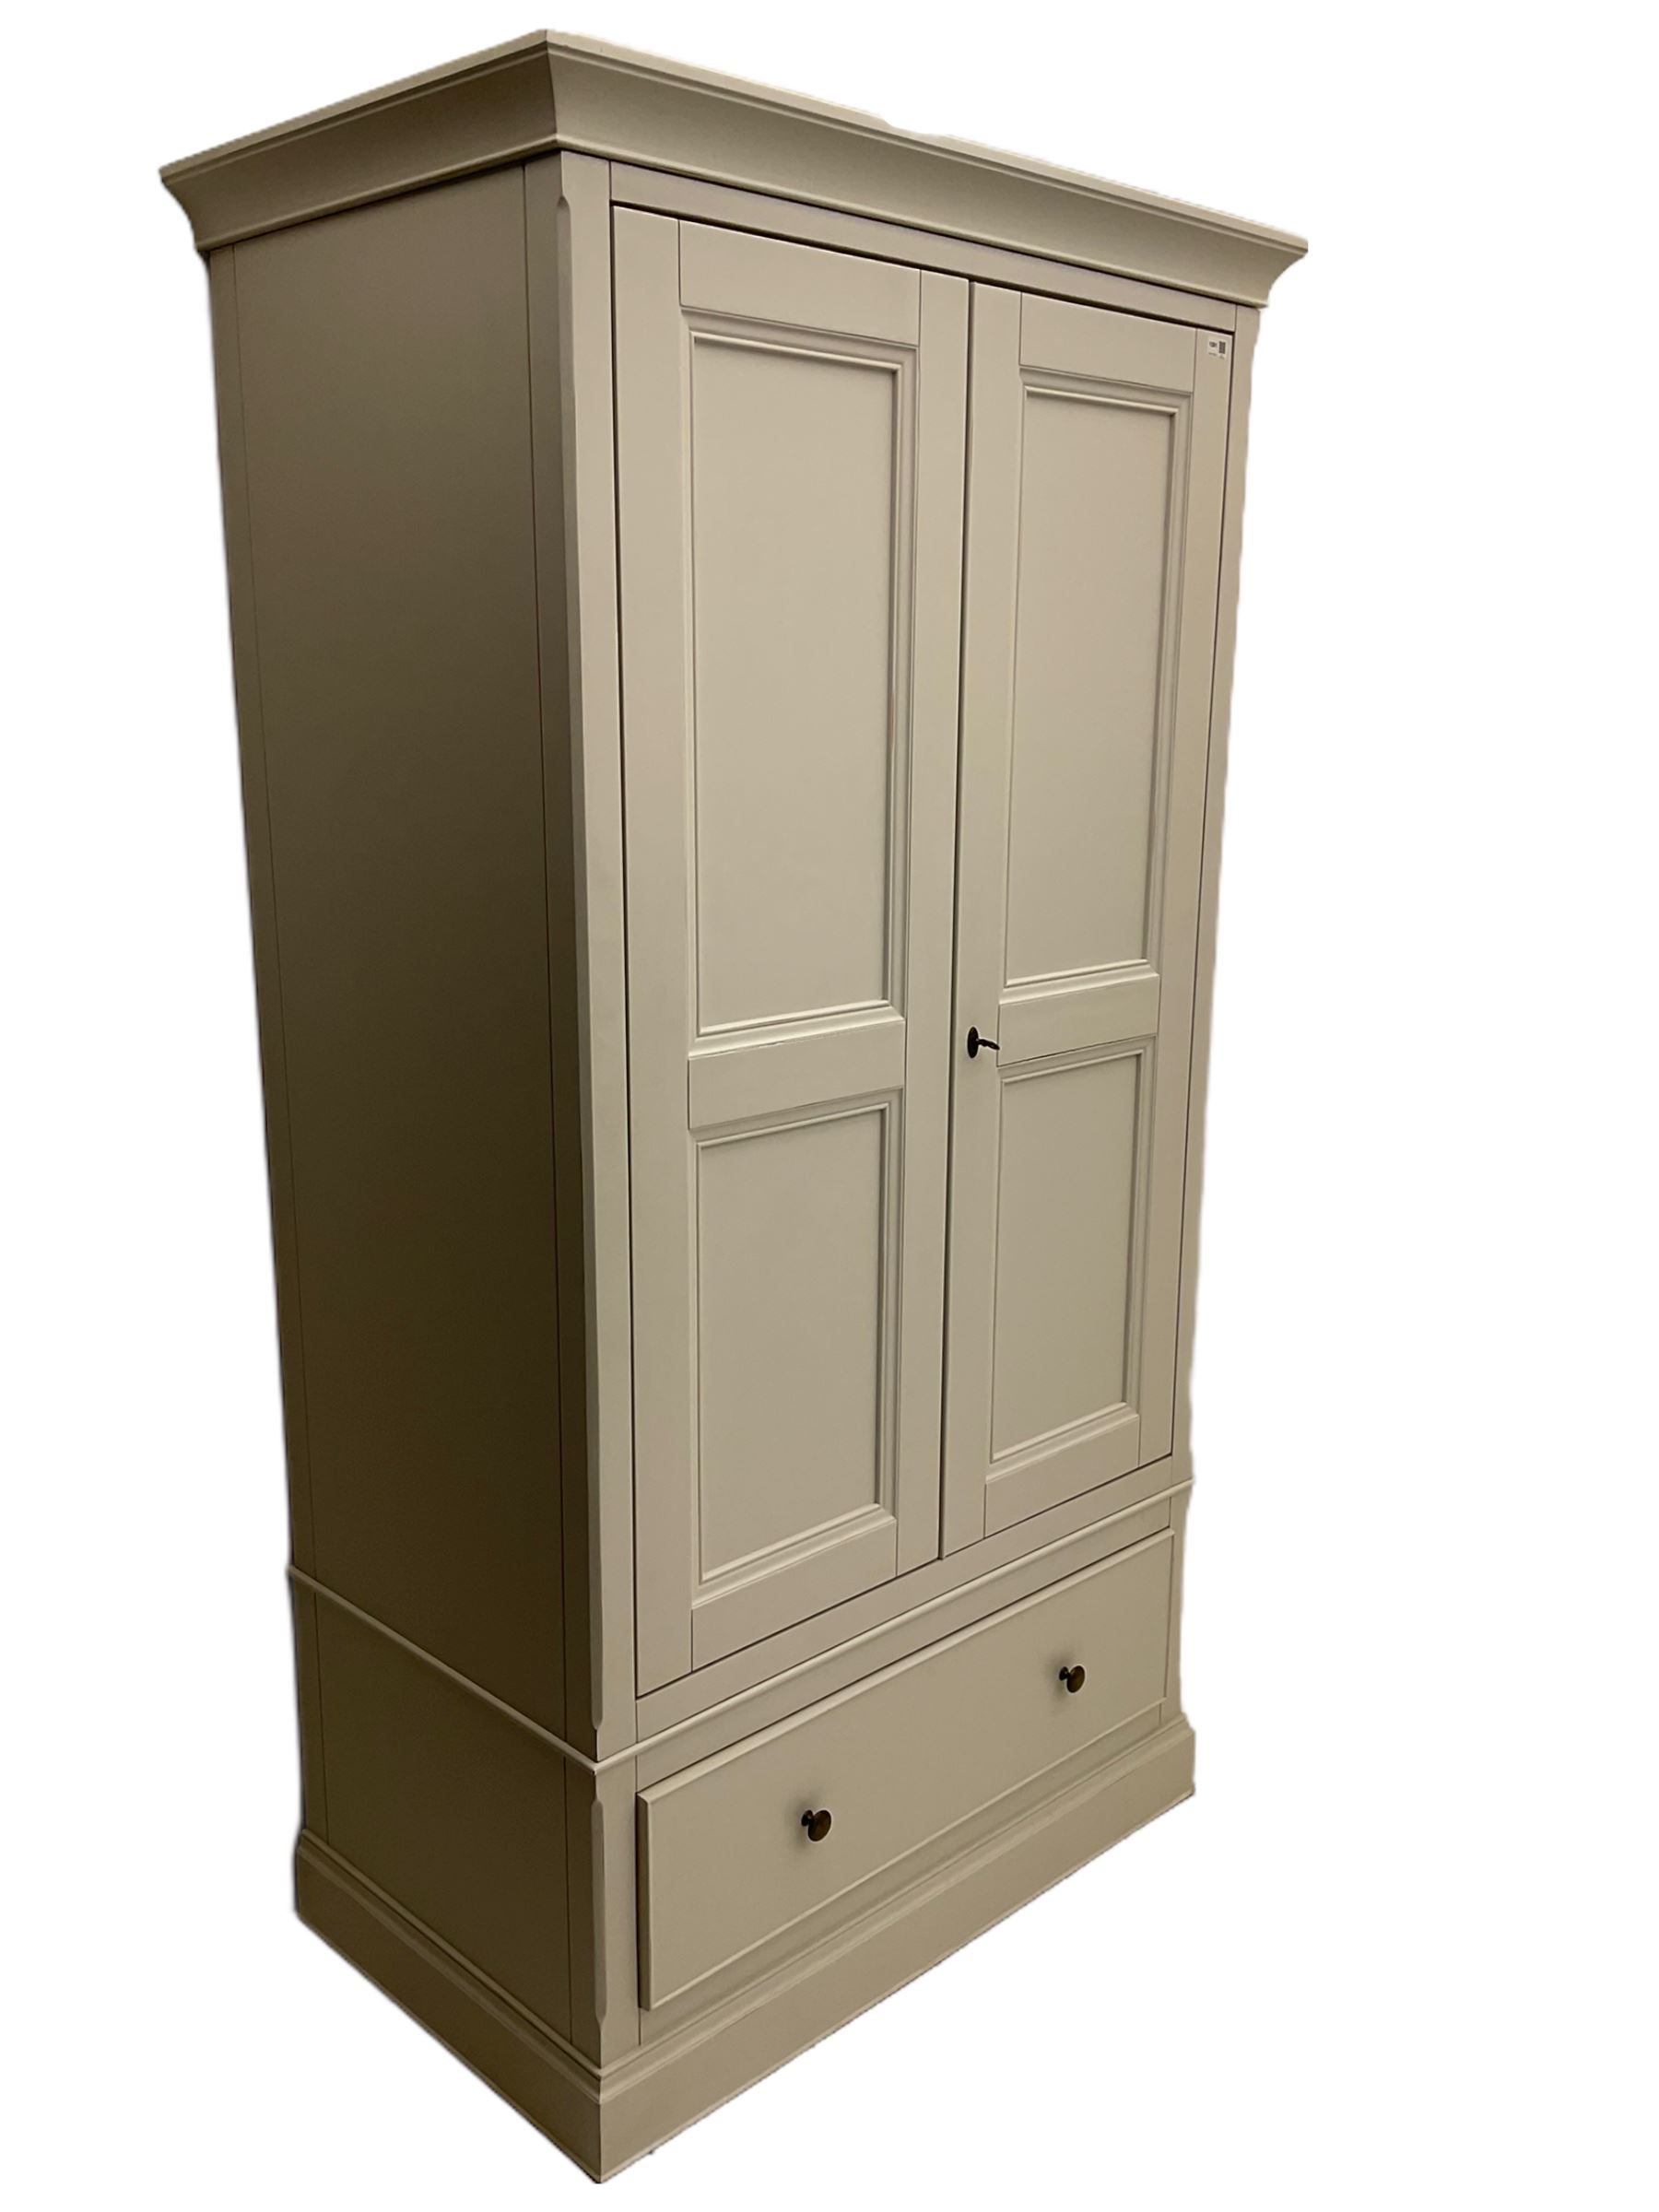 Willis Gambier white painted double wardrobe - Image 3 of 6